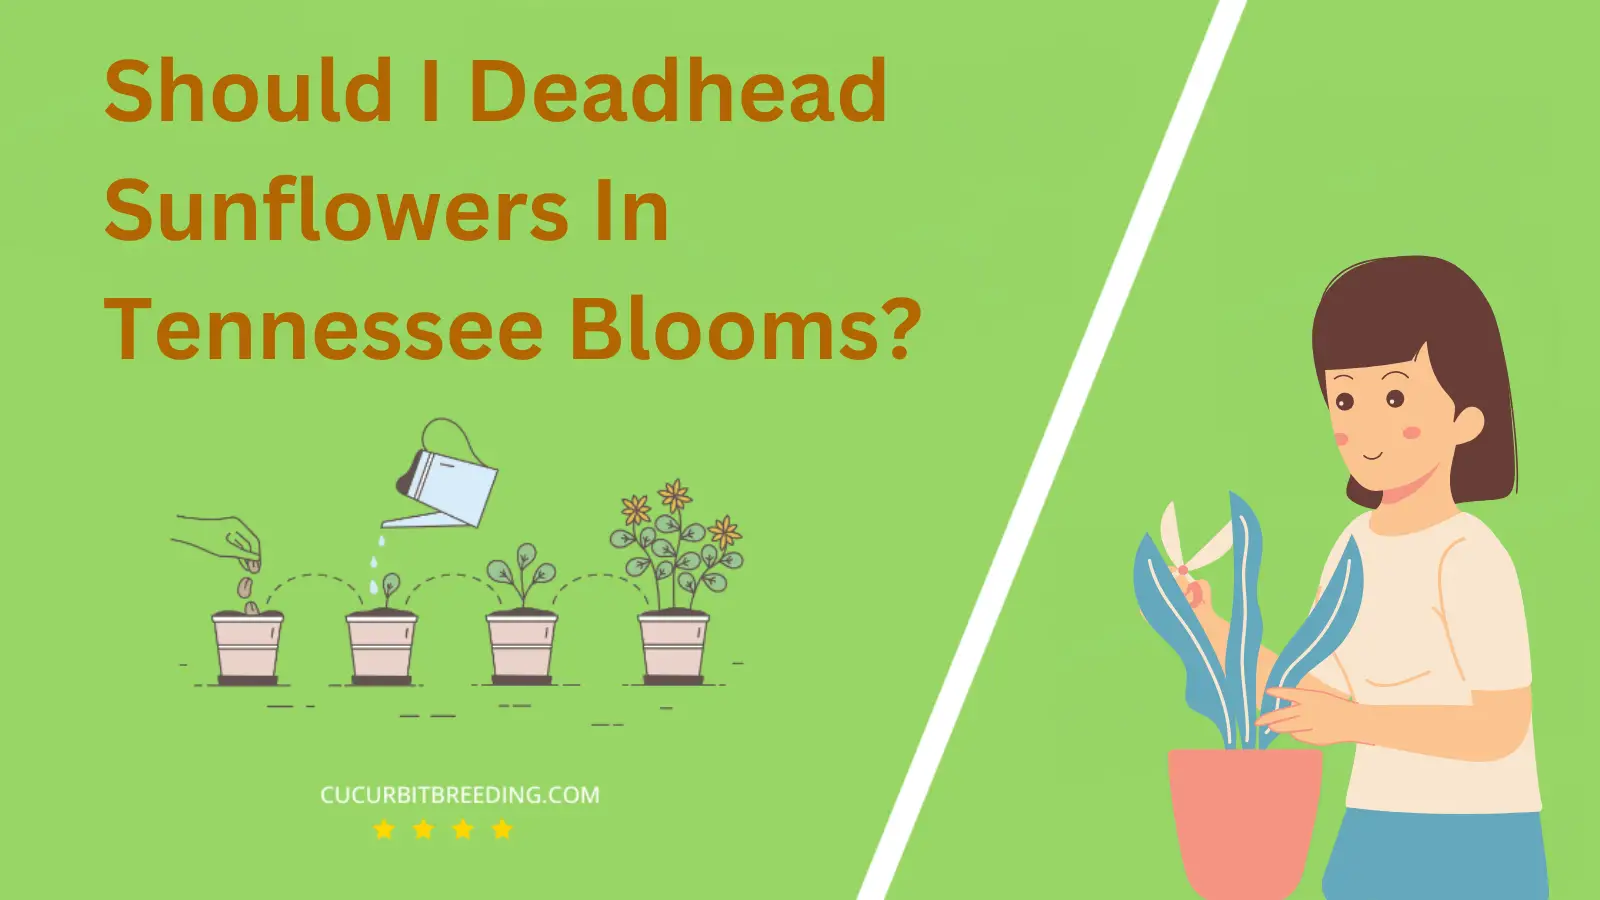 Should I Deadhead Sunflowers In Tennessee Blooms?